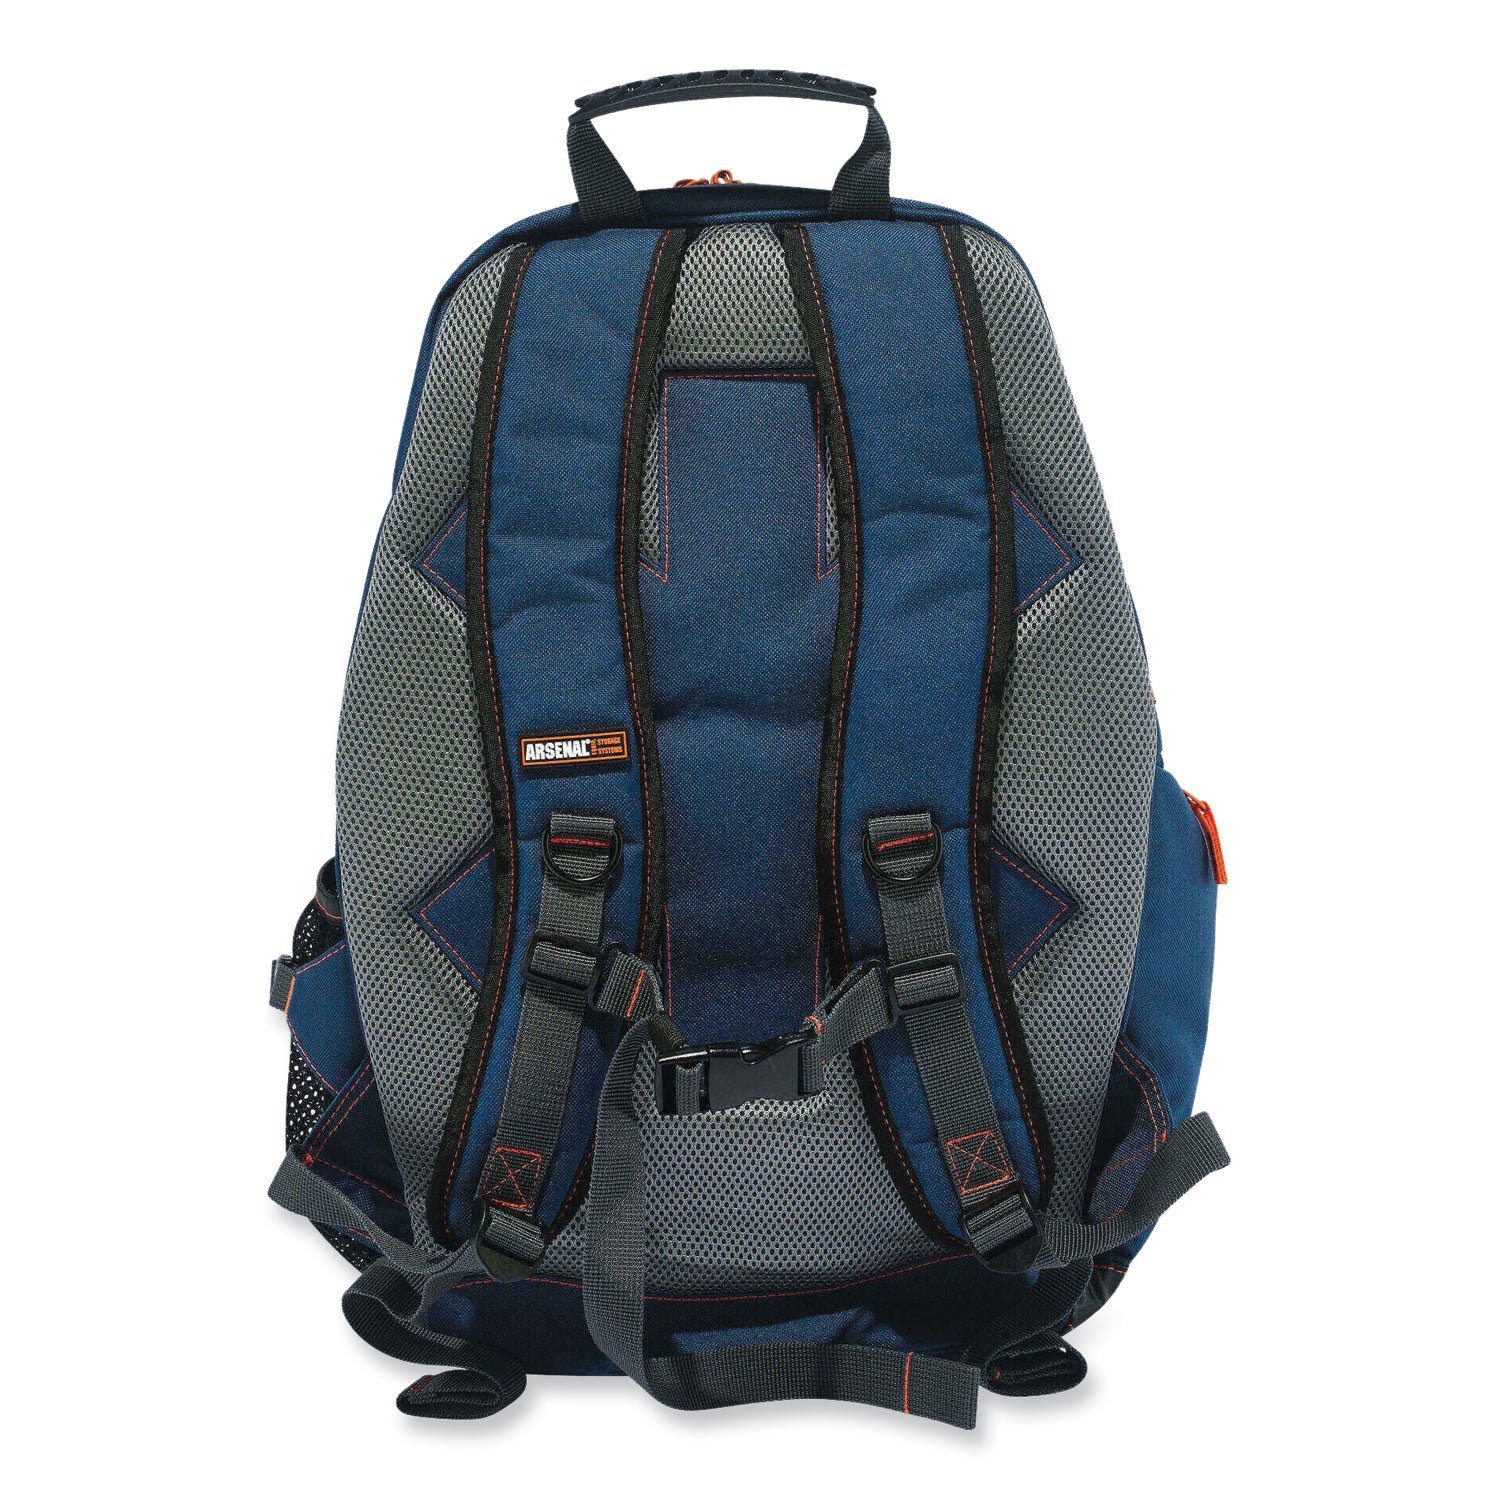 arsenal-5244-responder-backpack-8-x-145-x-20-blue-ships-in-1-3-business-days_ego13497 - 2